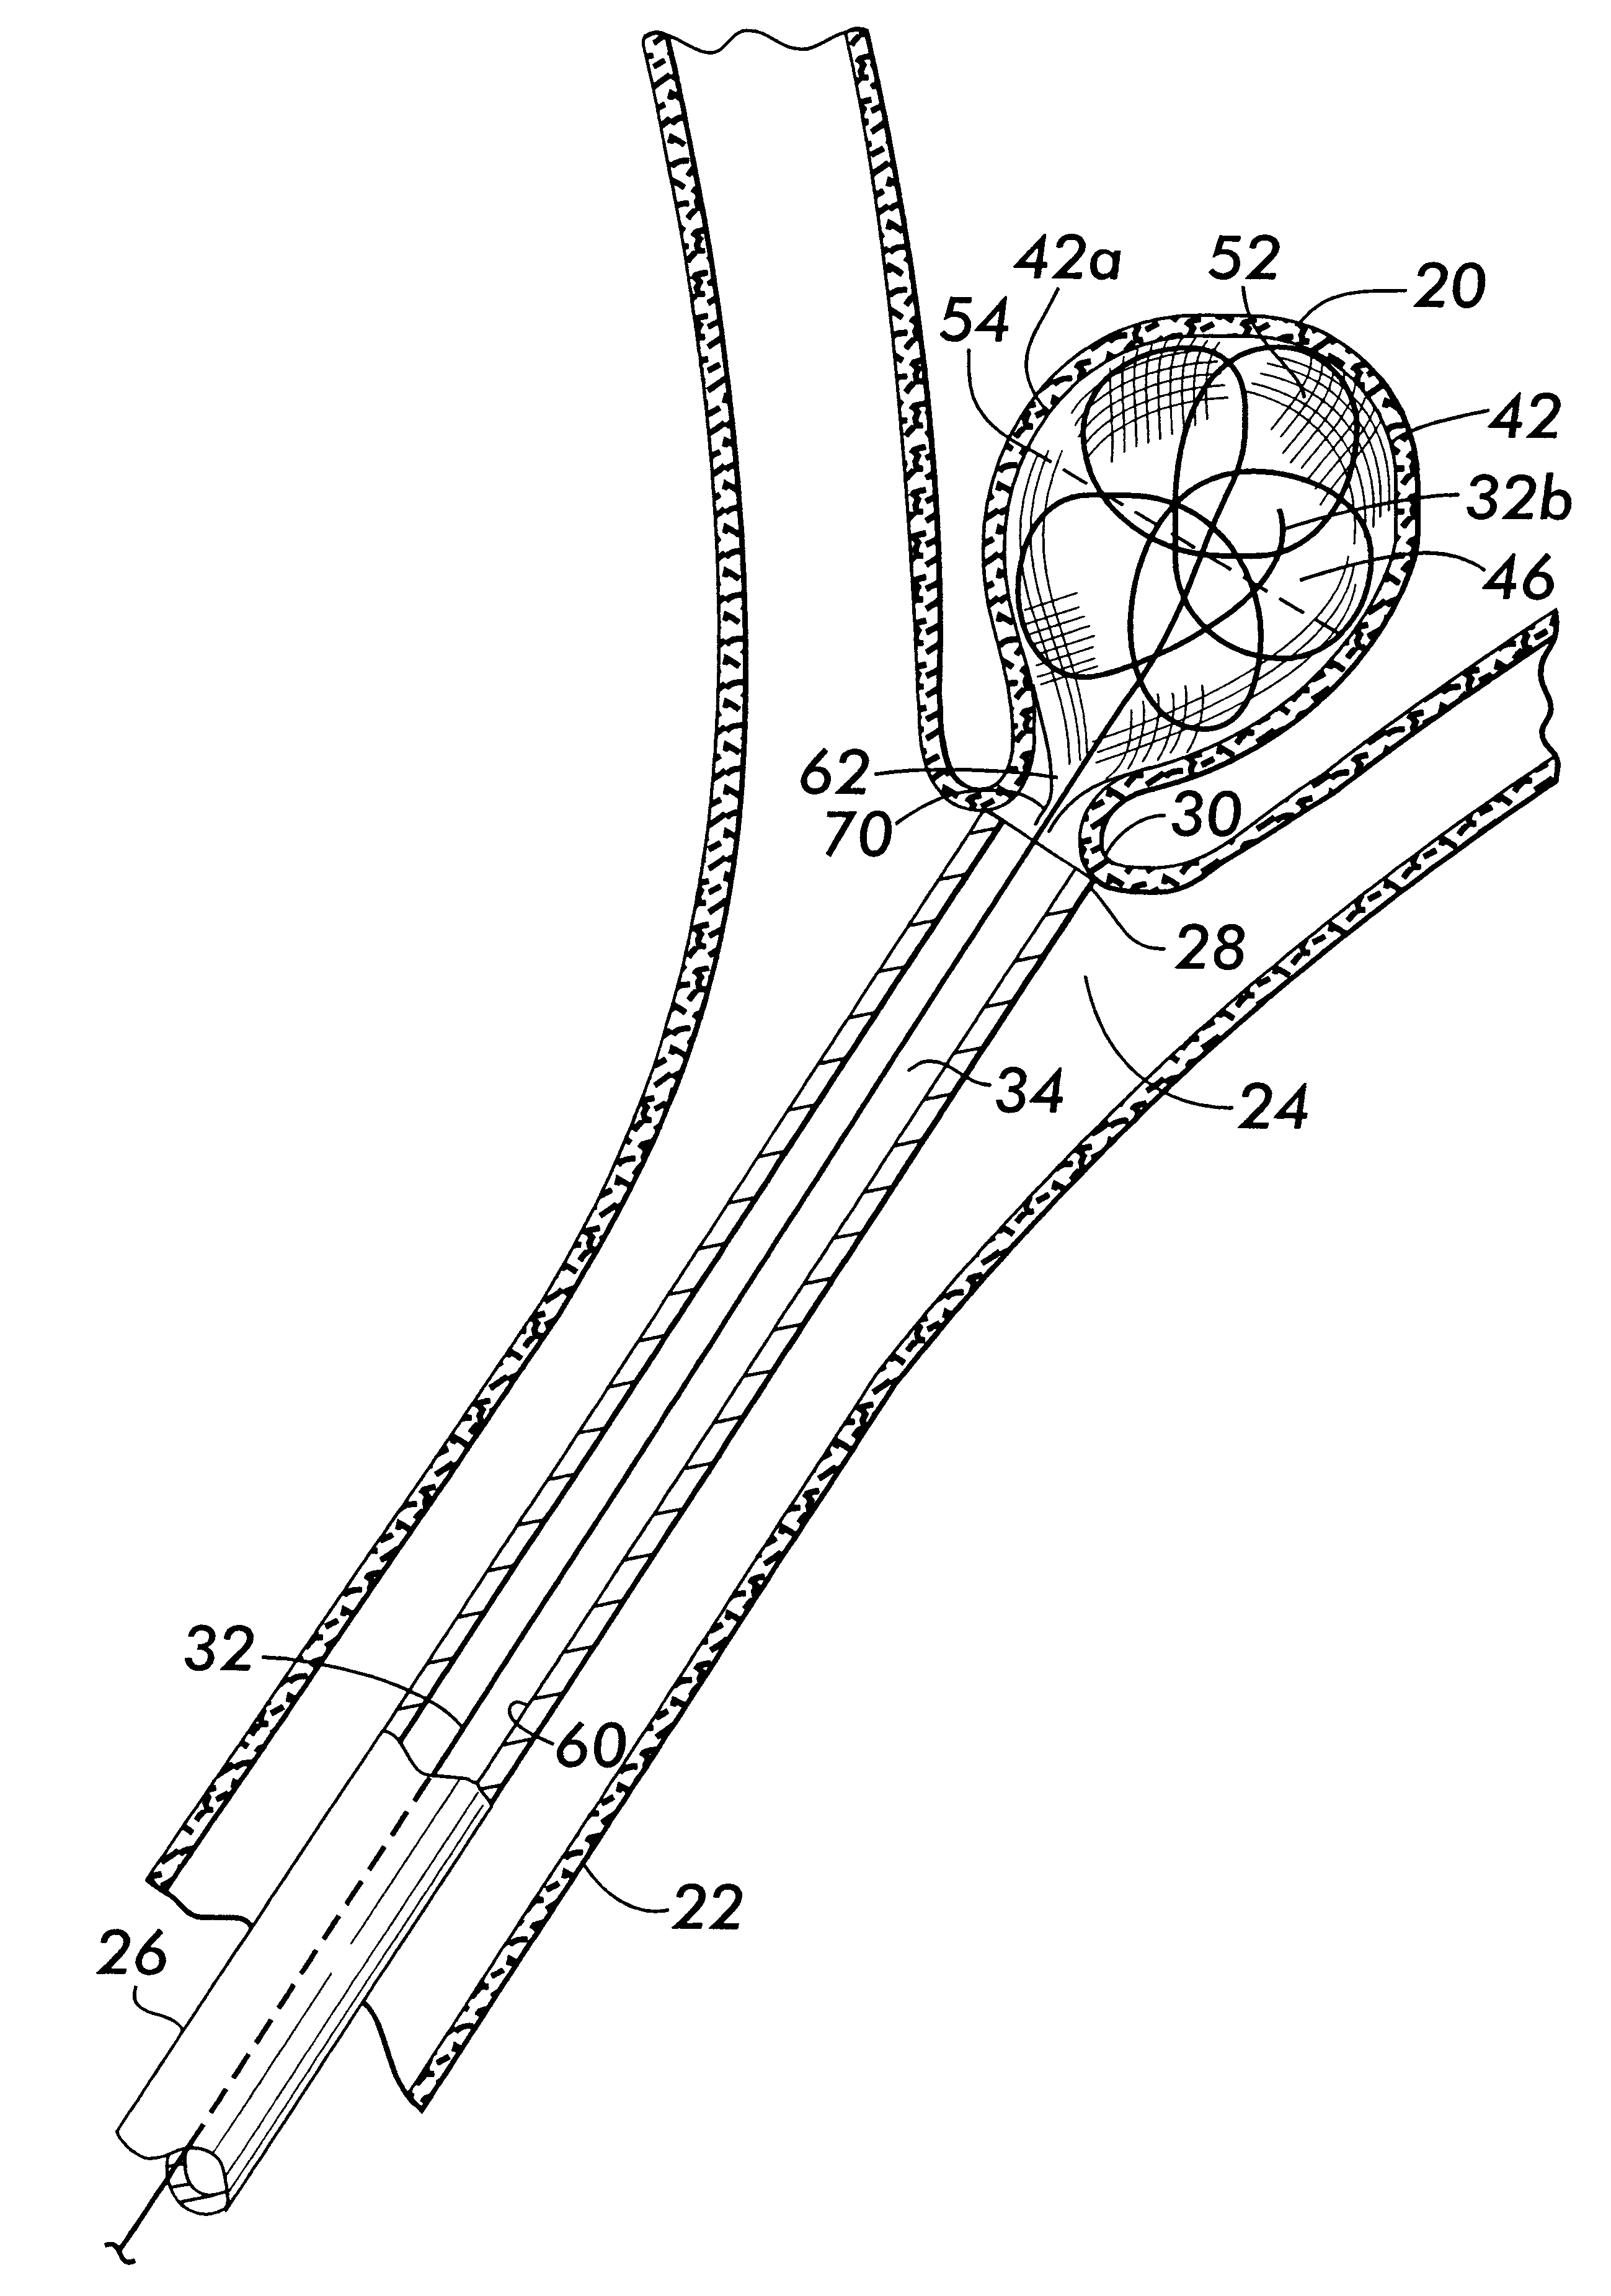 Bag for use in the intravascular treatment of saccular aneurysms